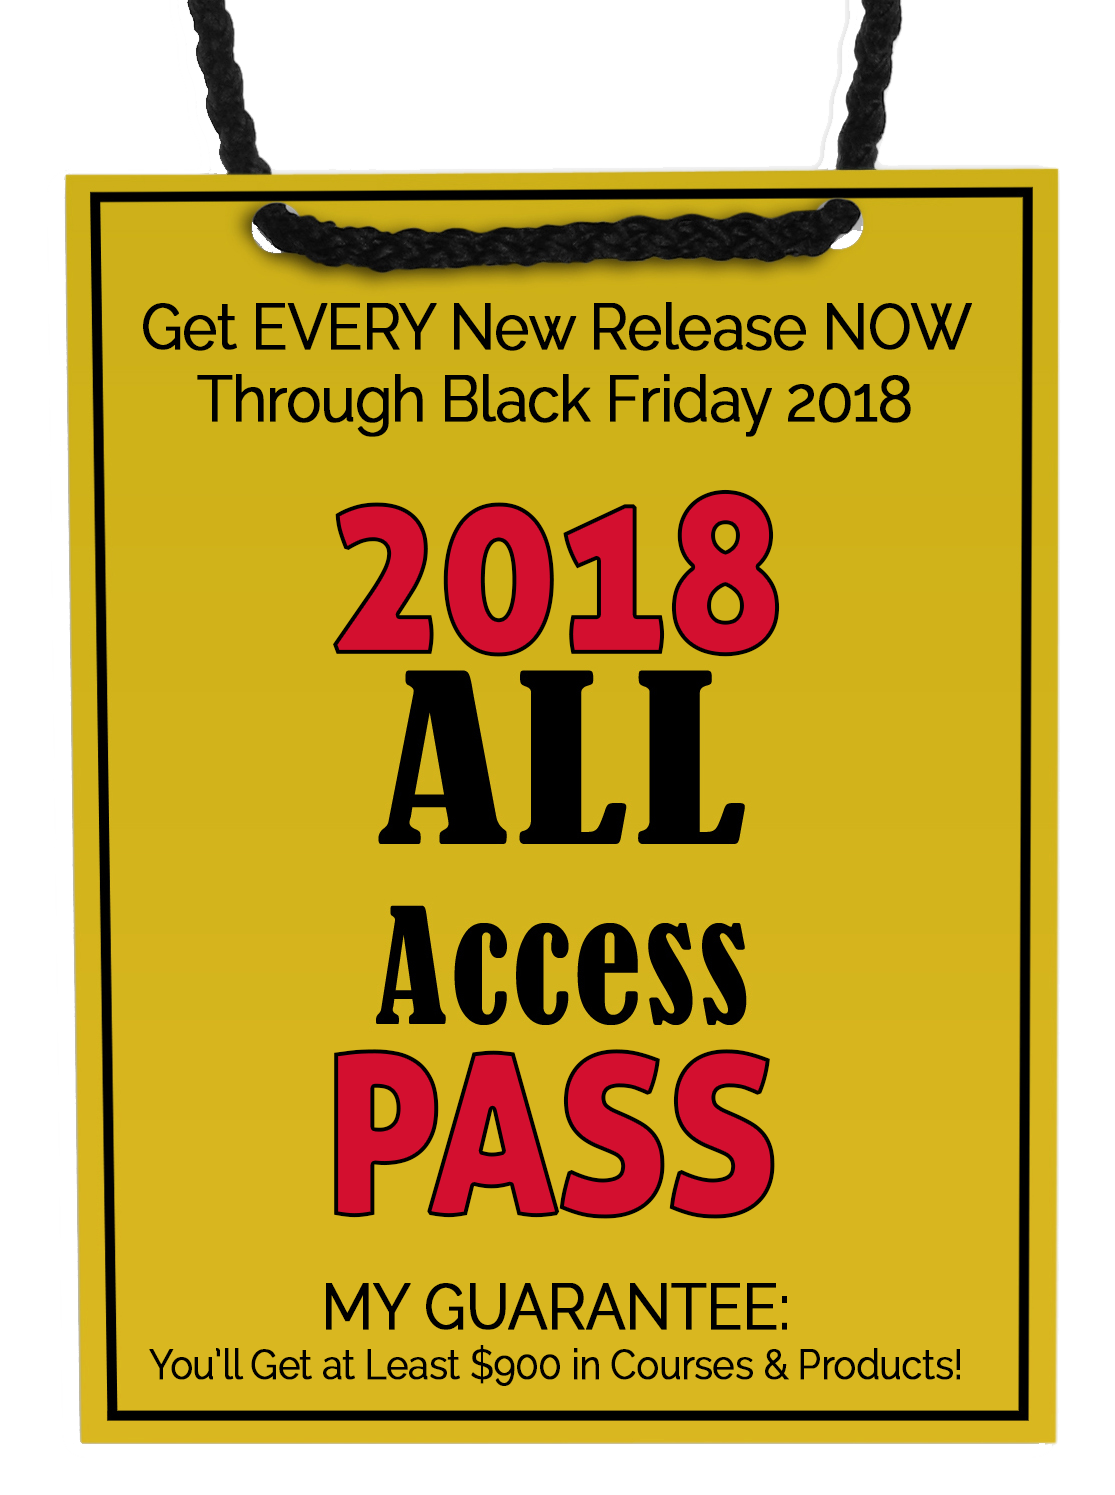 The All Access Pass